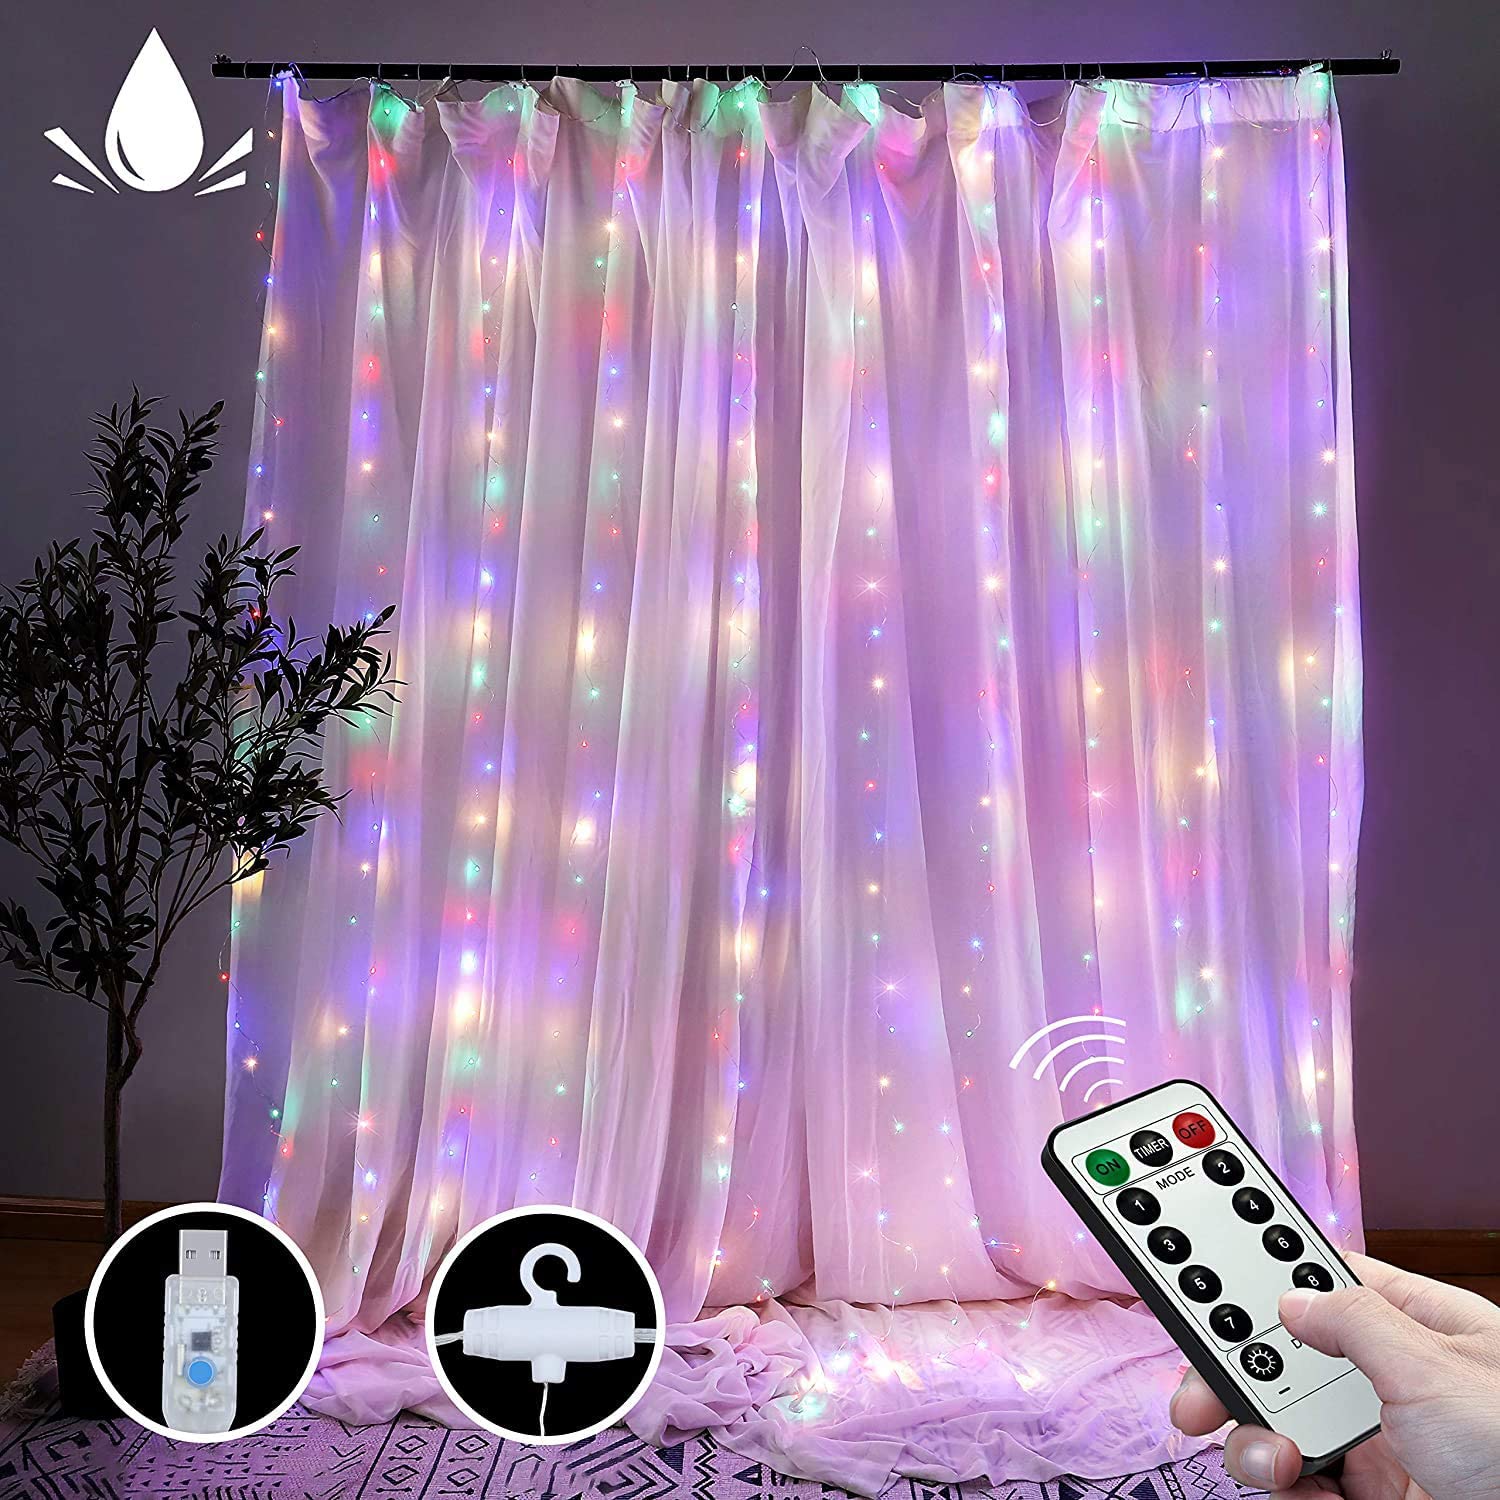 300 LEDs Window Curtain Fairy Lights 8 Modes and Remote Control for Bedroom (Multicolor, 300 x 300cm) - SILBERSHELL